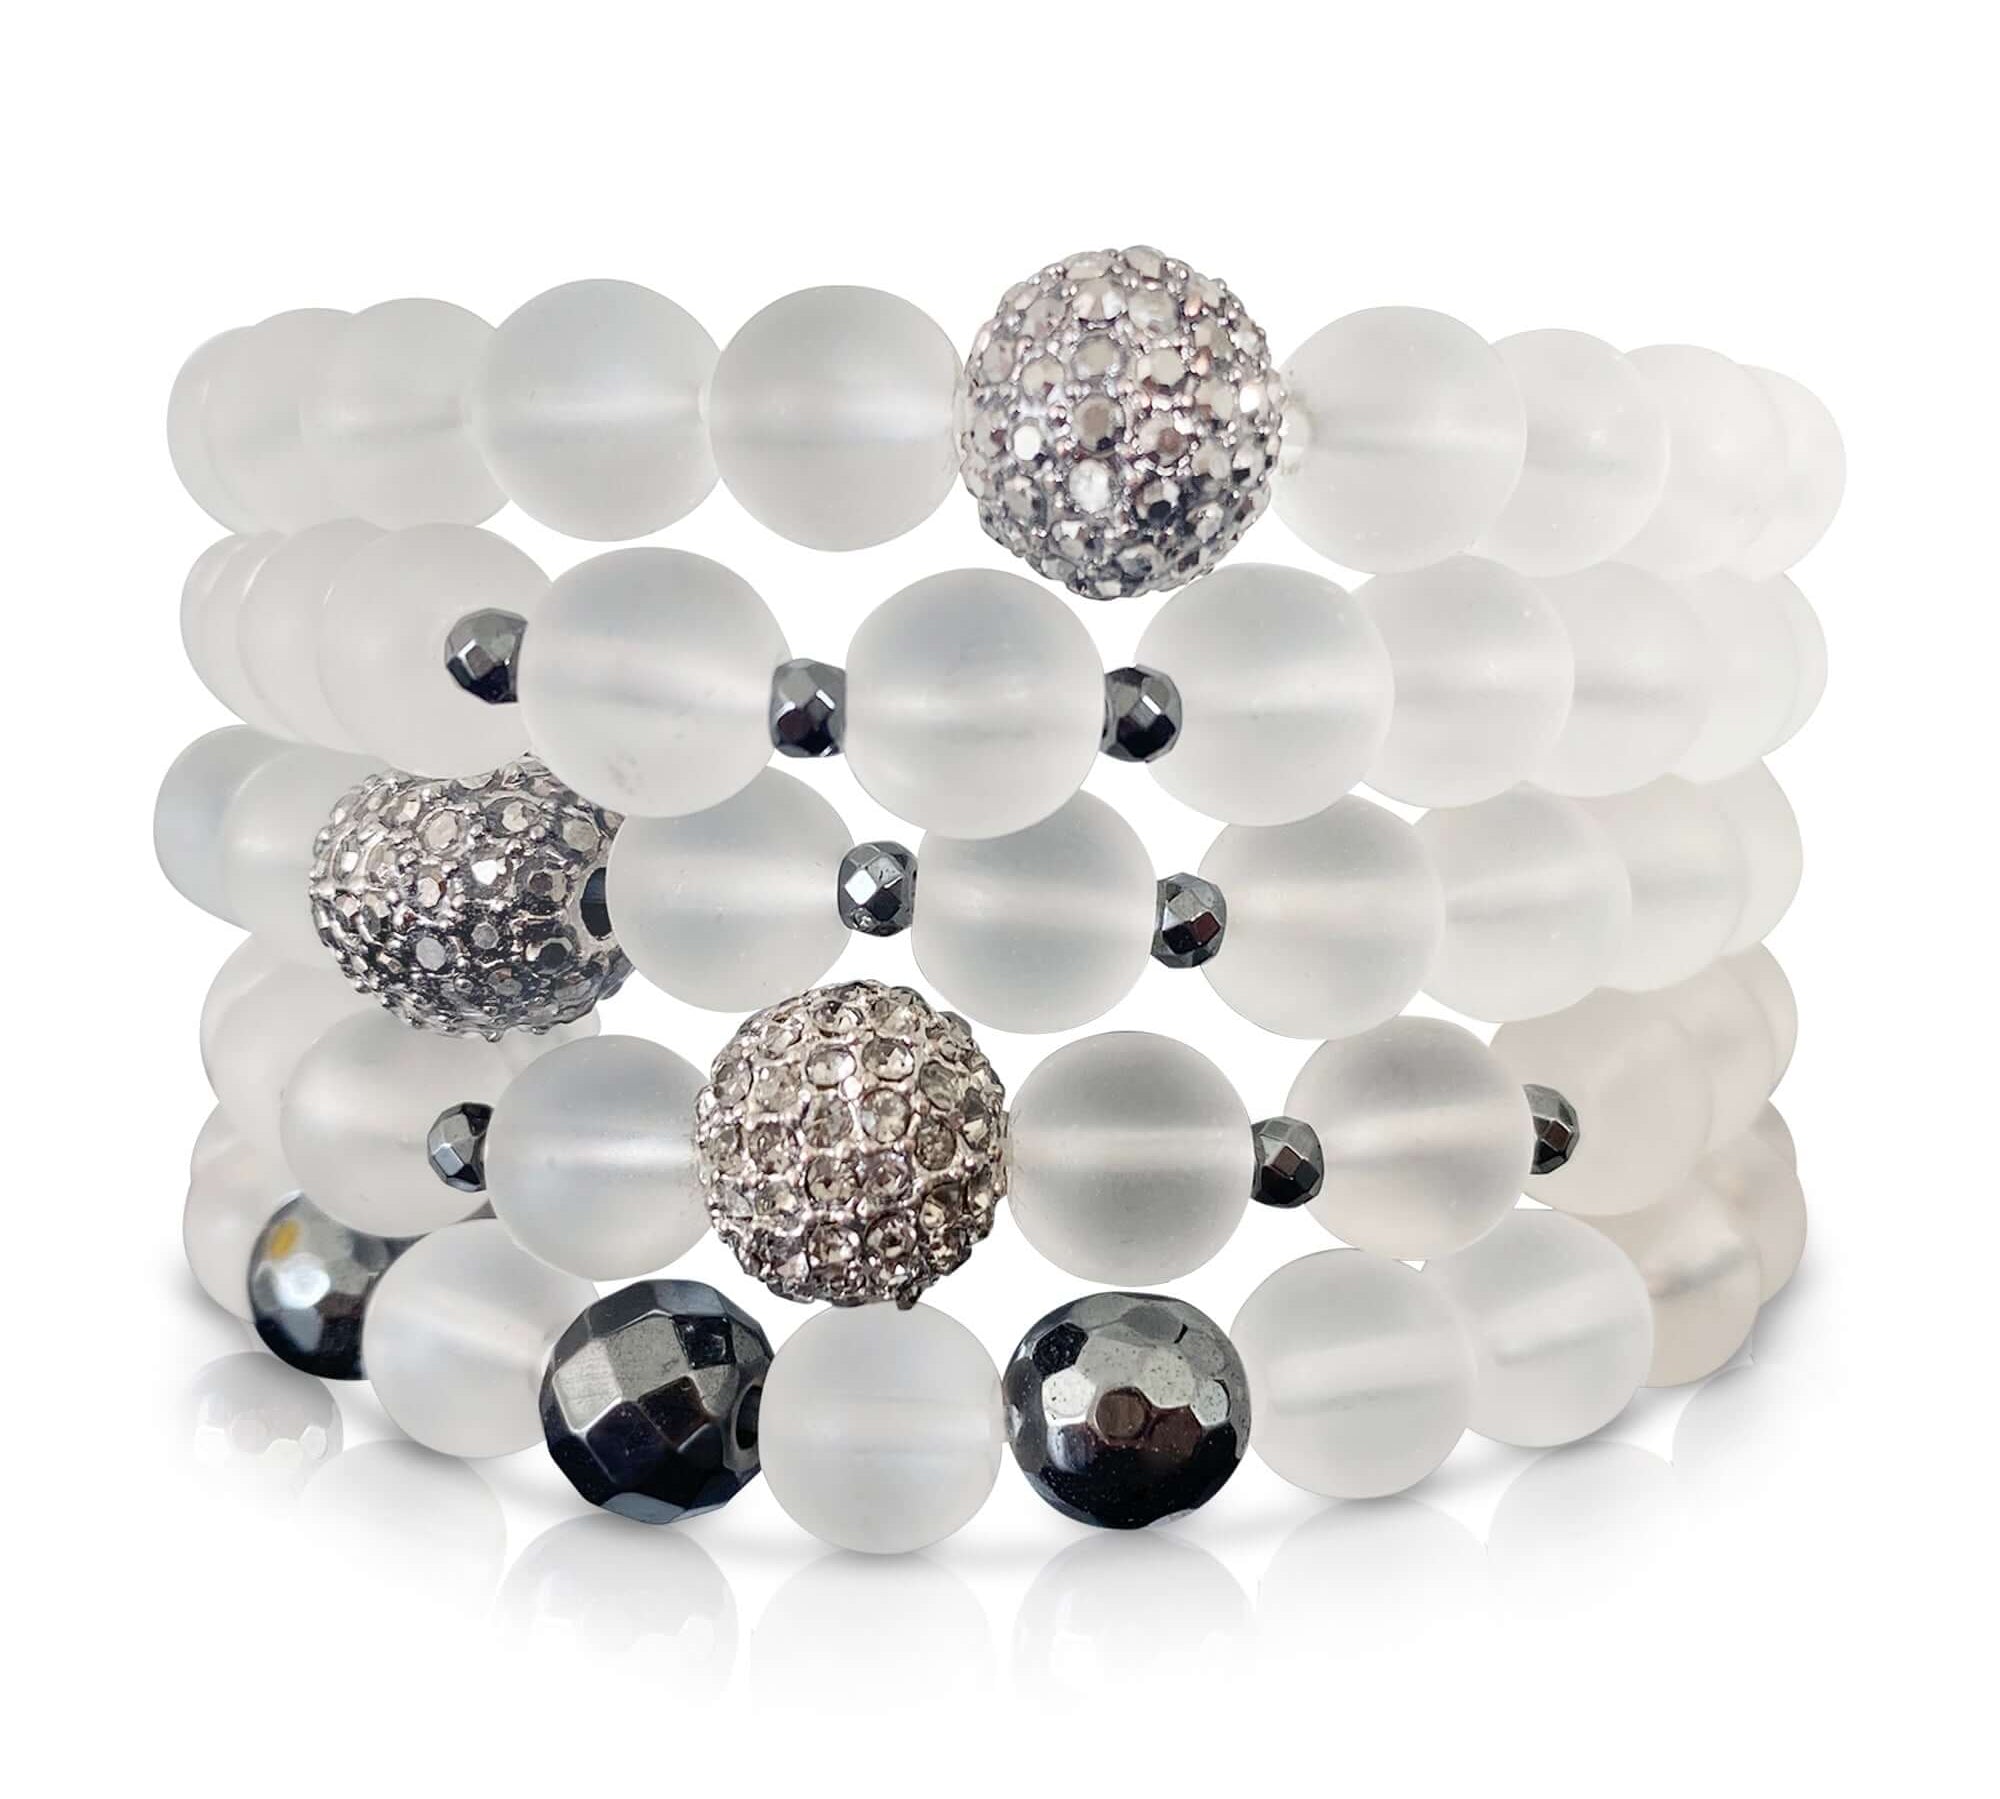 Stacked set of 5 frosted gunmetal pave bracelet with hematite accents by Alessandra James.